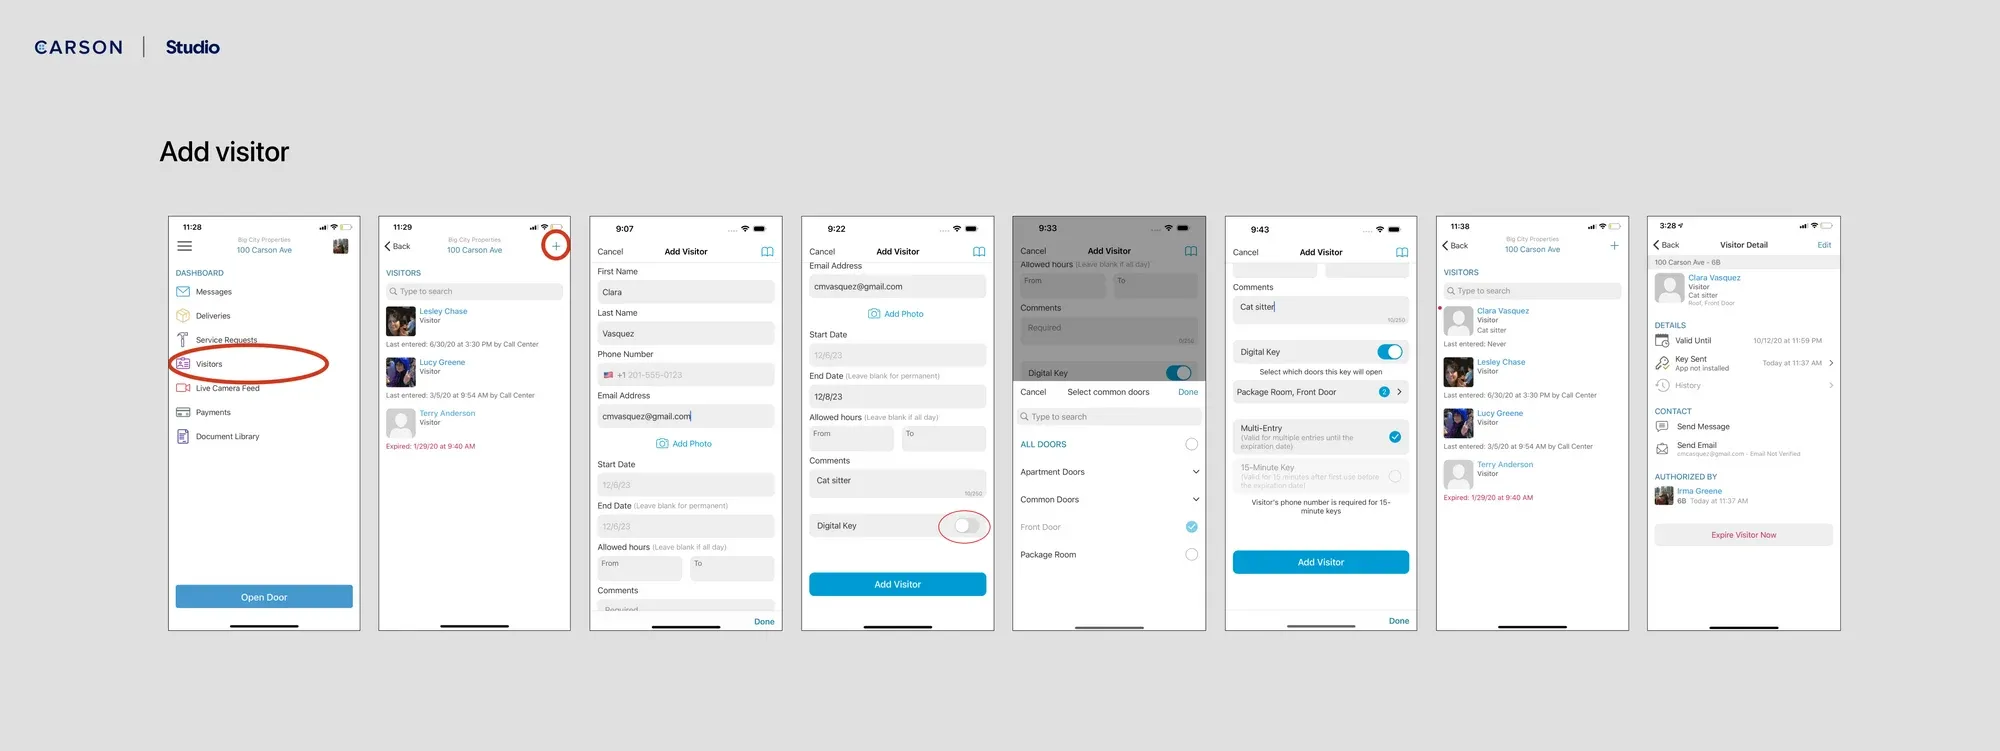 A step-by-step guide on a mobile app for adding a visitor. The process involves navigating through visitor selection, entering details, configuring access options, and reviewing the visitor's profile and access permissions.